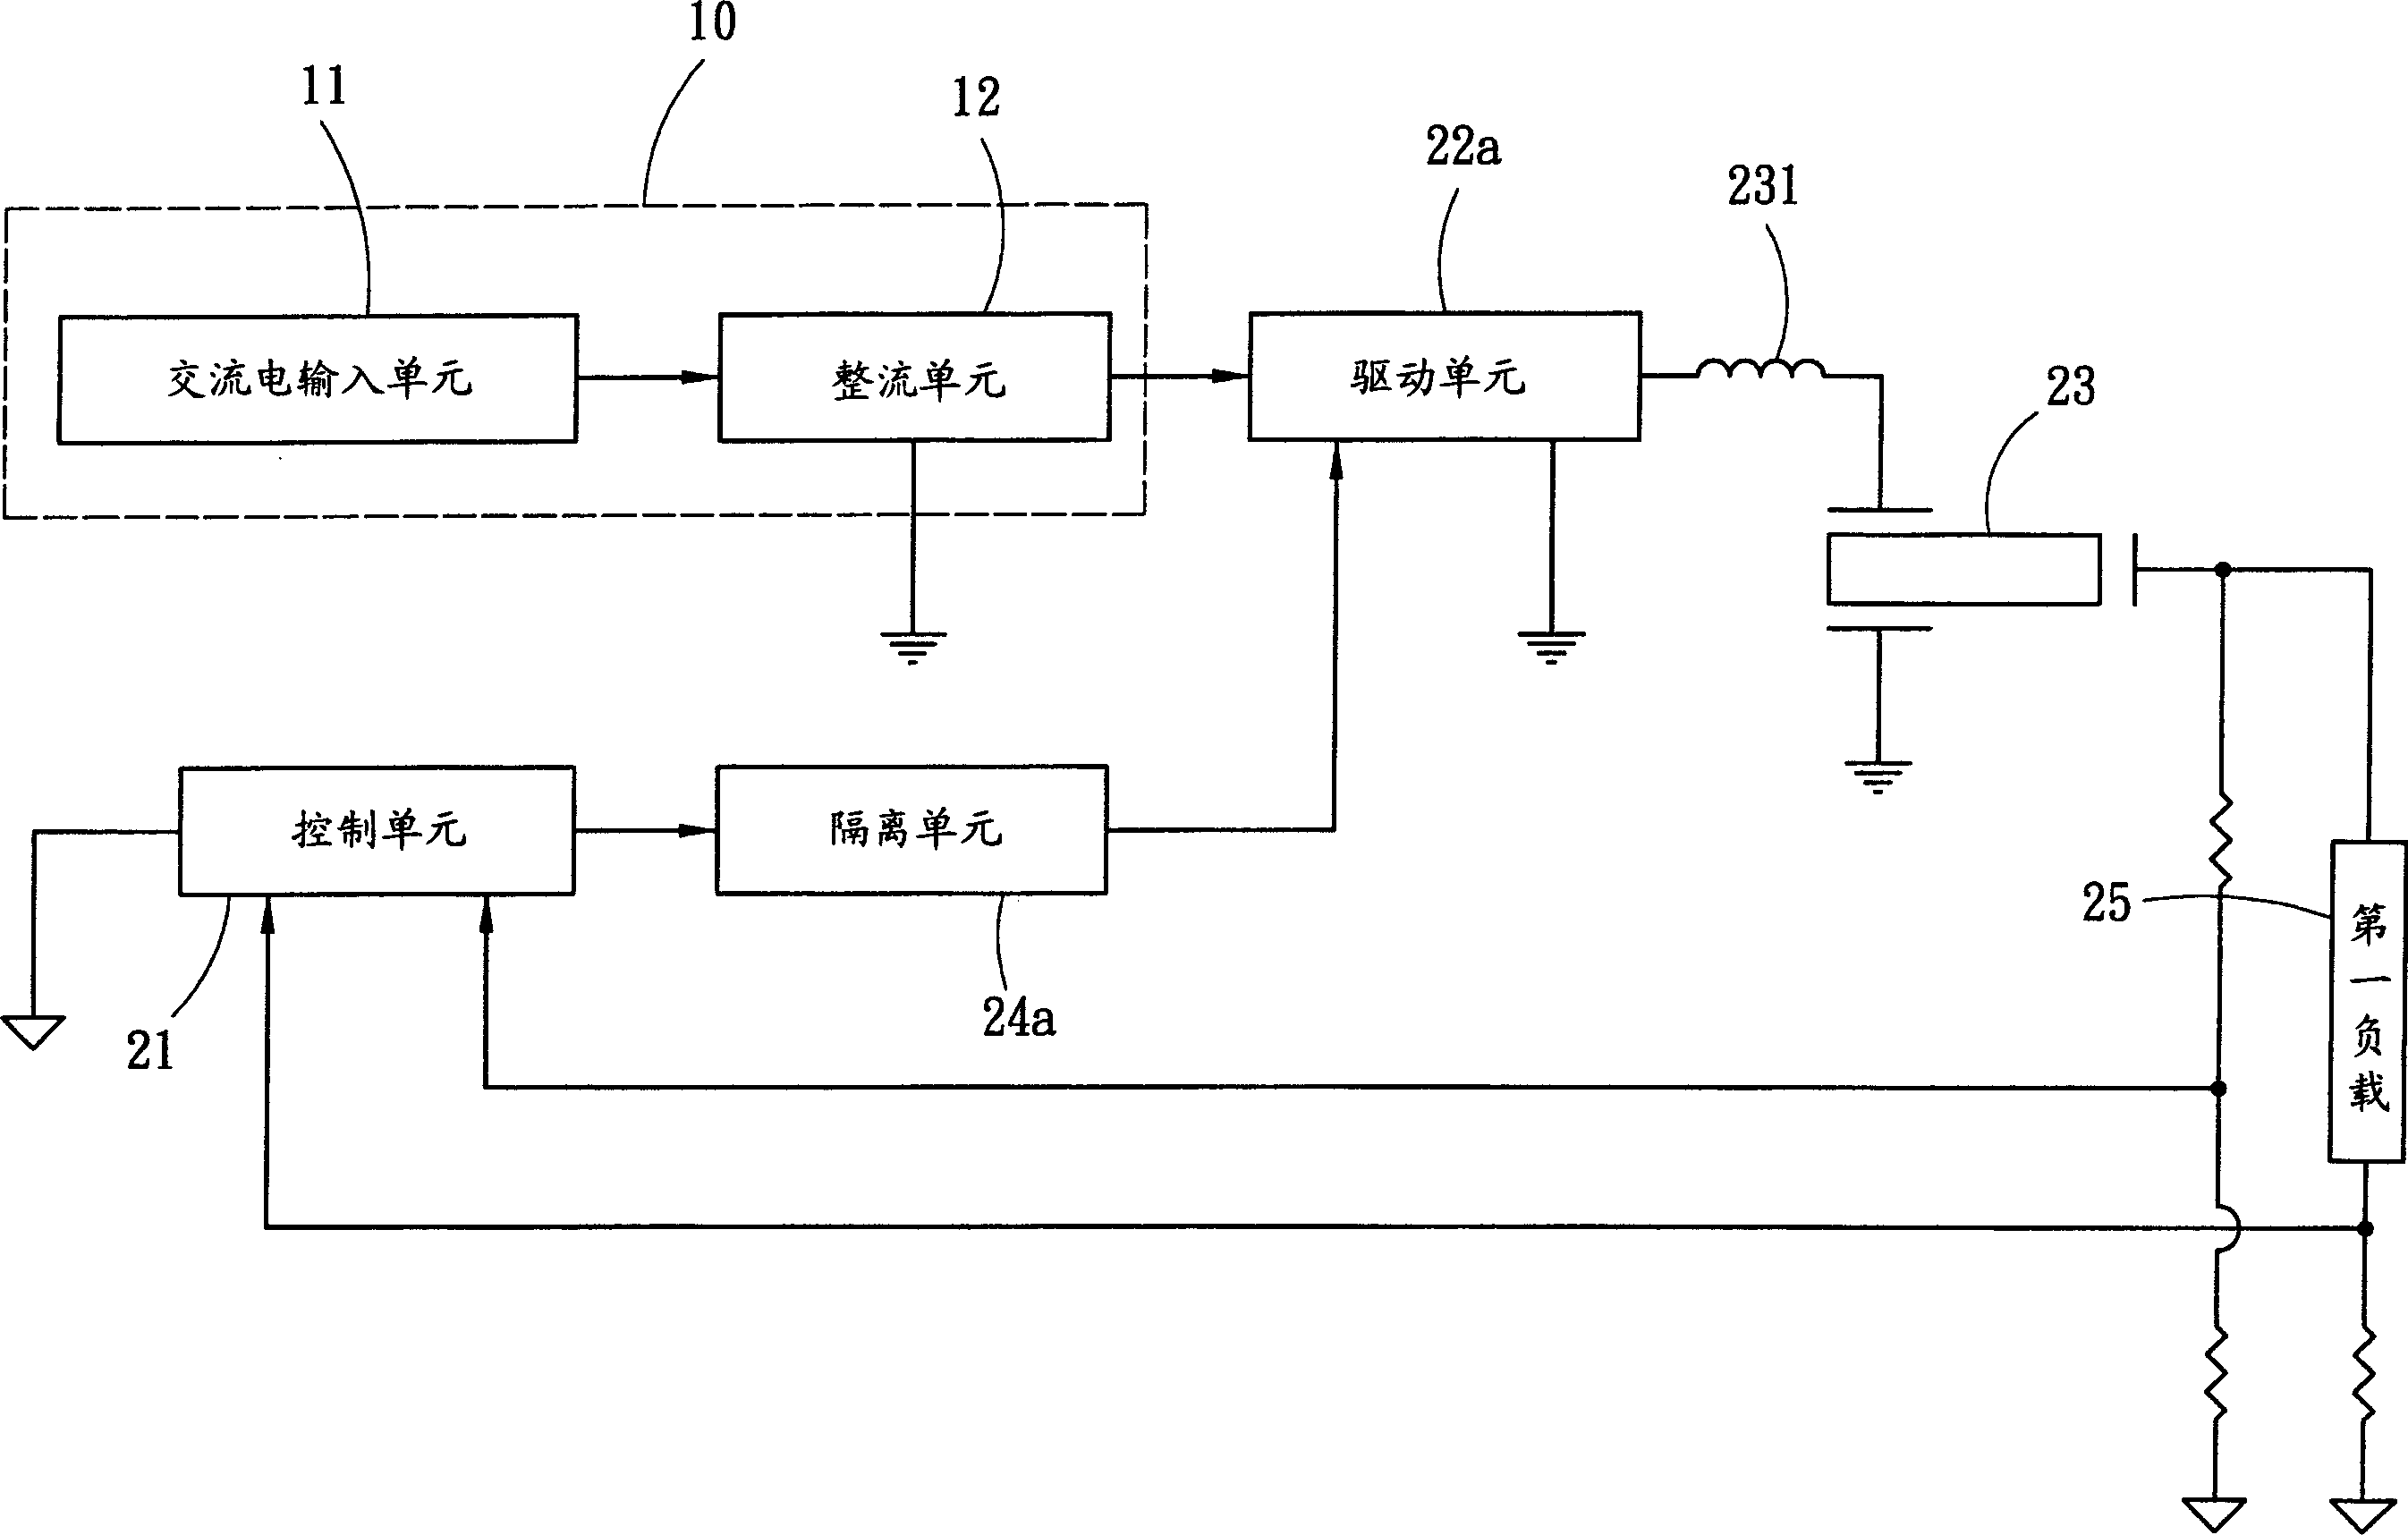 Inverter circuit for suppressing electric power conducted interference